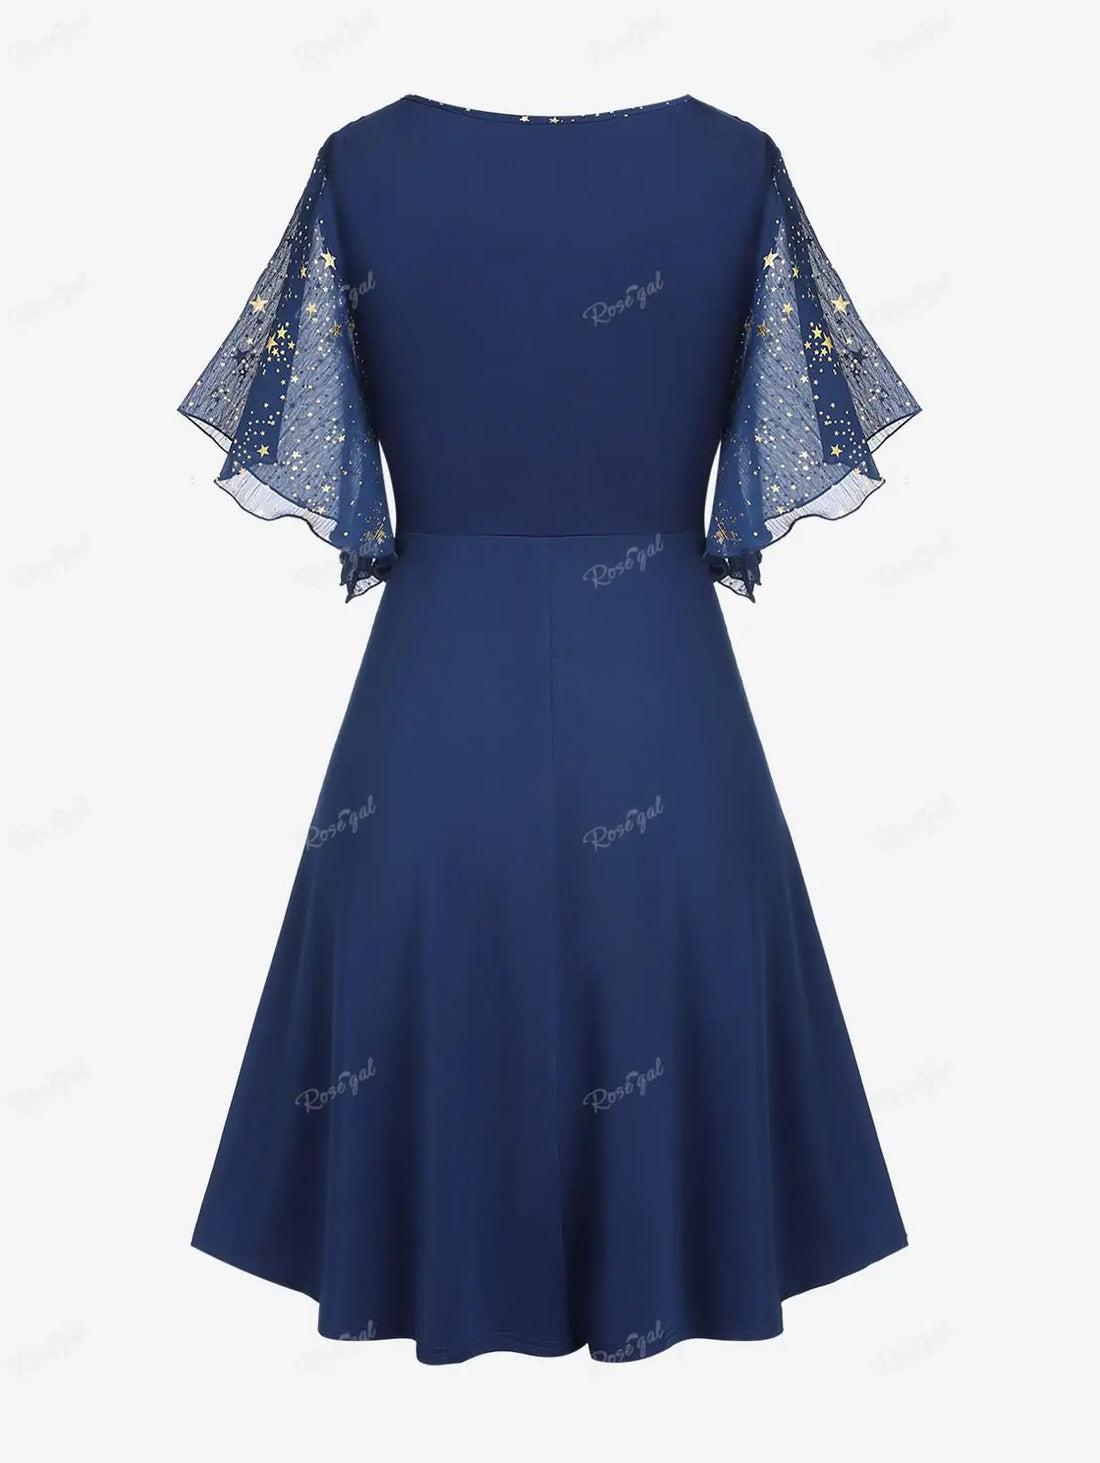 ROSEGAL Plus Size Stars Print Buckle Button Pockets Ruched Butterfly Sleeves Dress Deep Blue Women Casual Square Collar Dresses